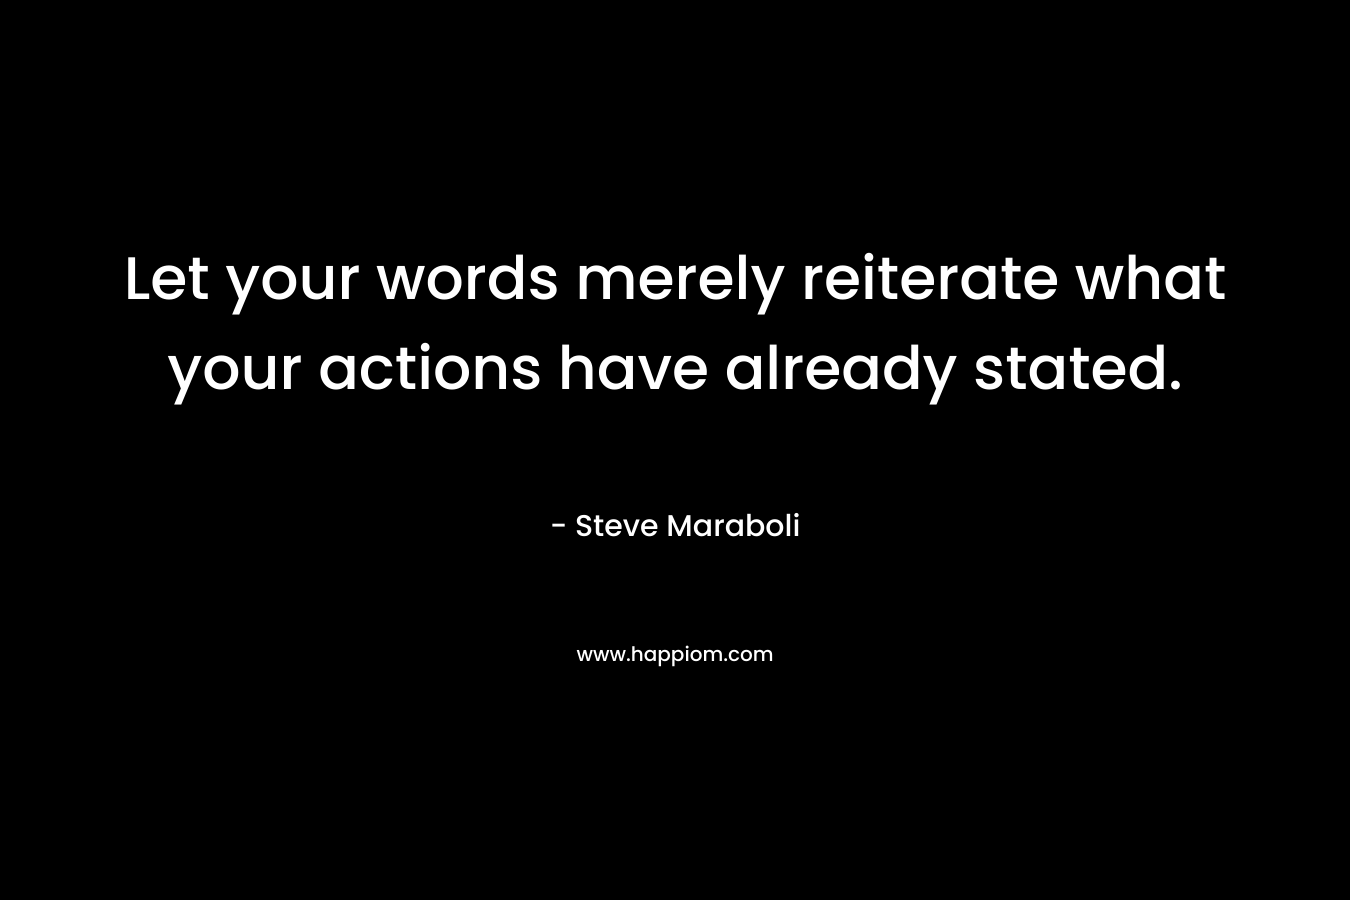 Let your words merely reiterate what your actions have already stated. – Steve Maraboli